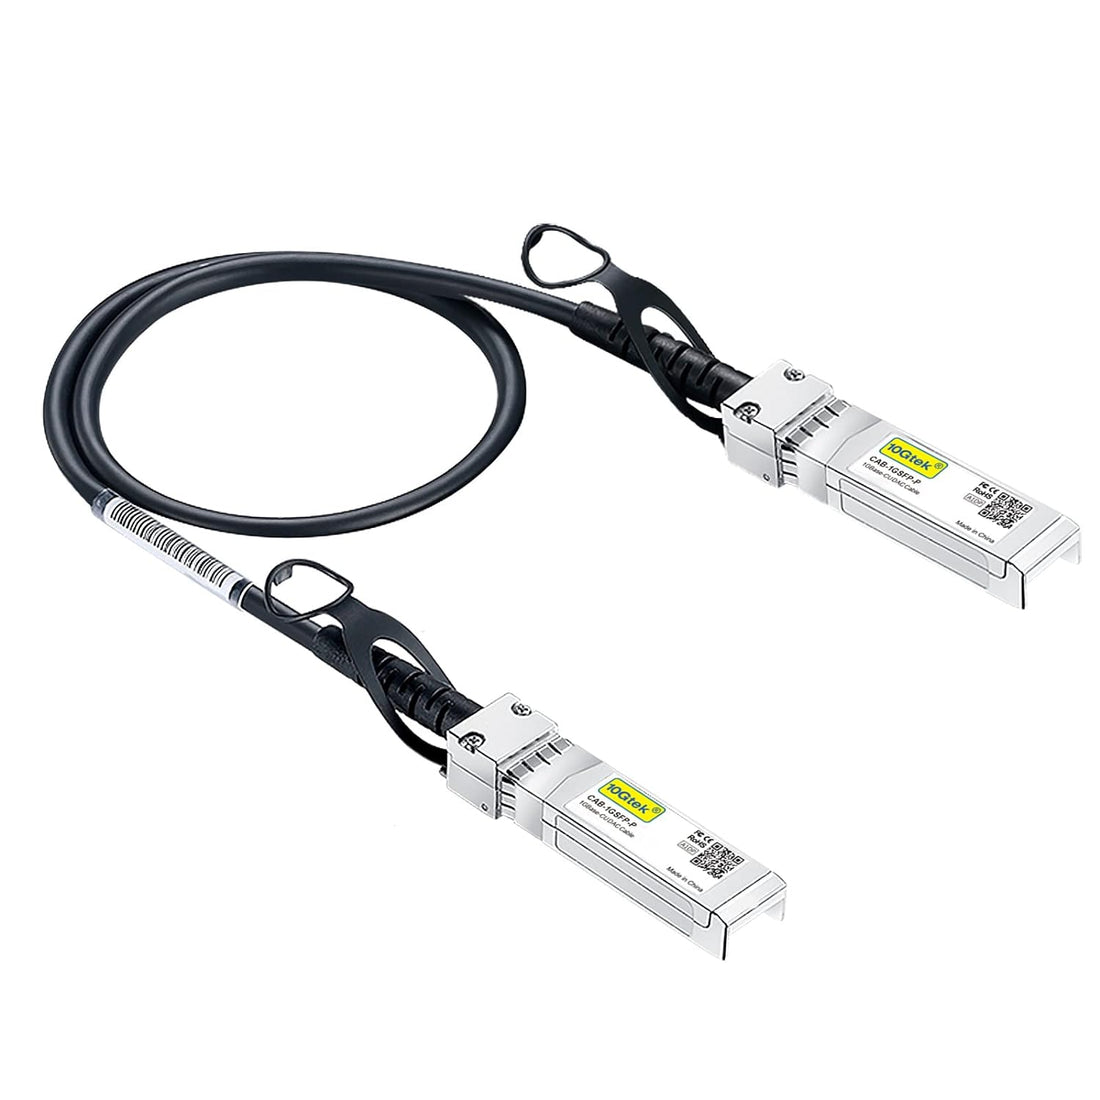 10Gtek 1.25G SFP DAC Twinax Cable - Gigabit Passive Direct Attach Copper Twinax SFP Cable for Cisco SFP-1GBASE-CU0.25M, Ubiquiti UniFi, Fortinet, Netgear, TP-Link and More, 0.25-Meter(0.82ft)